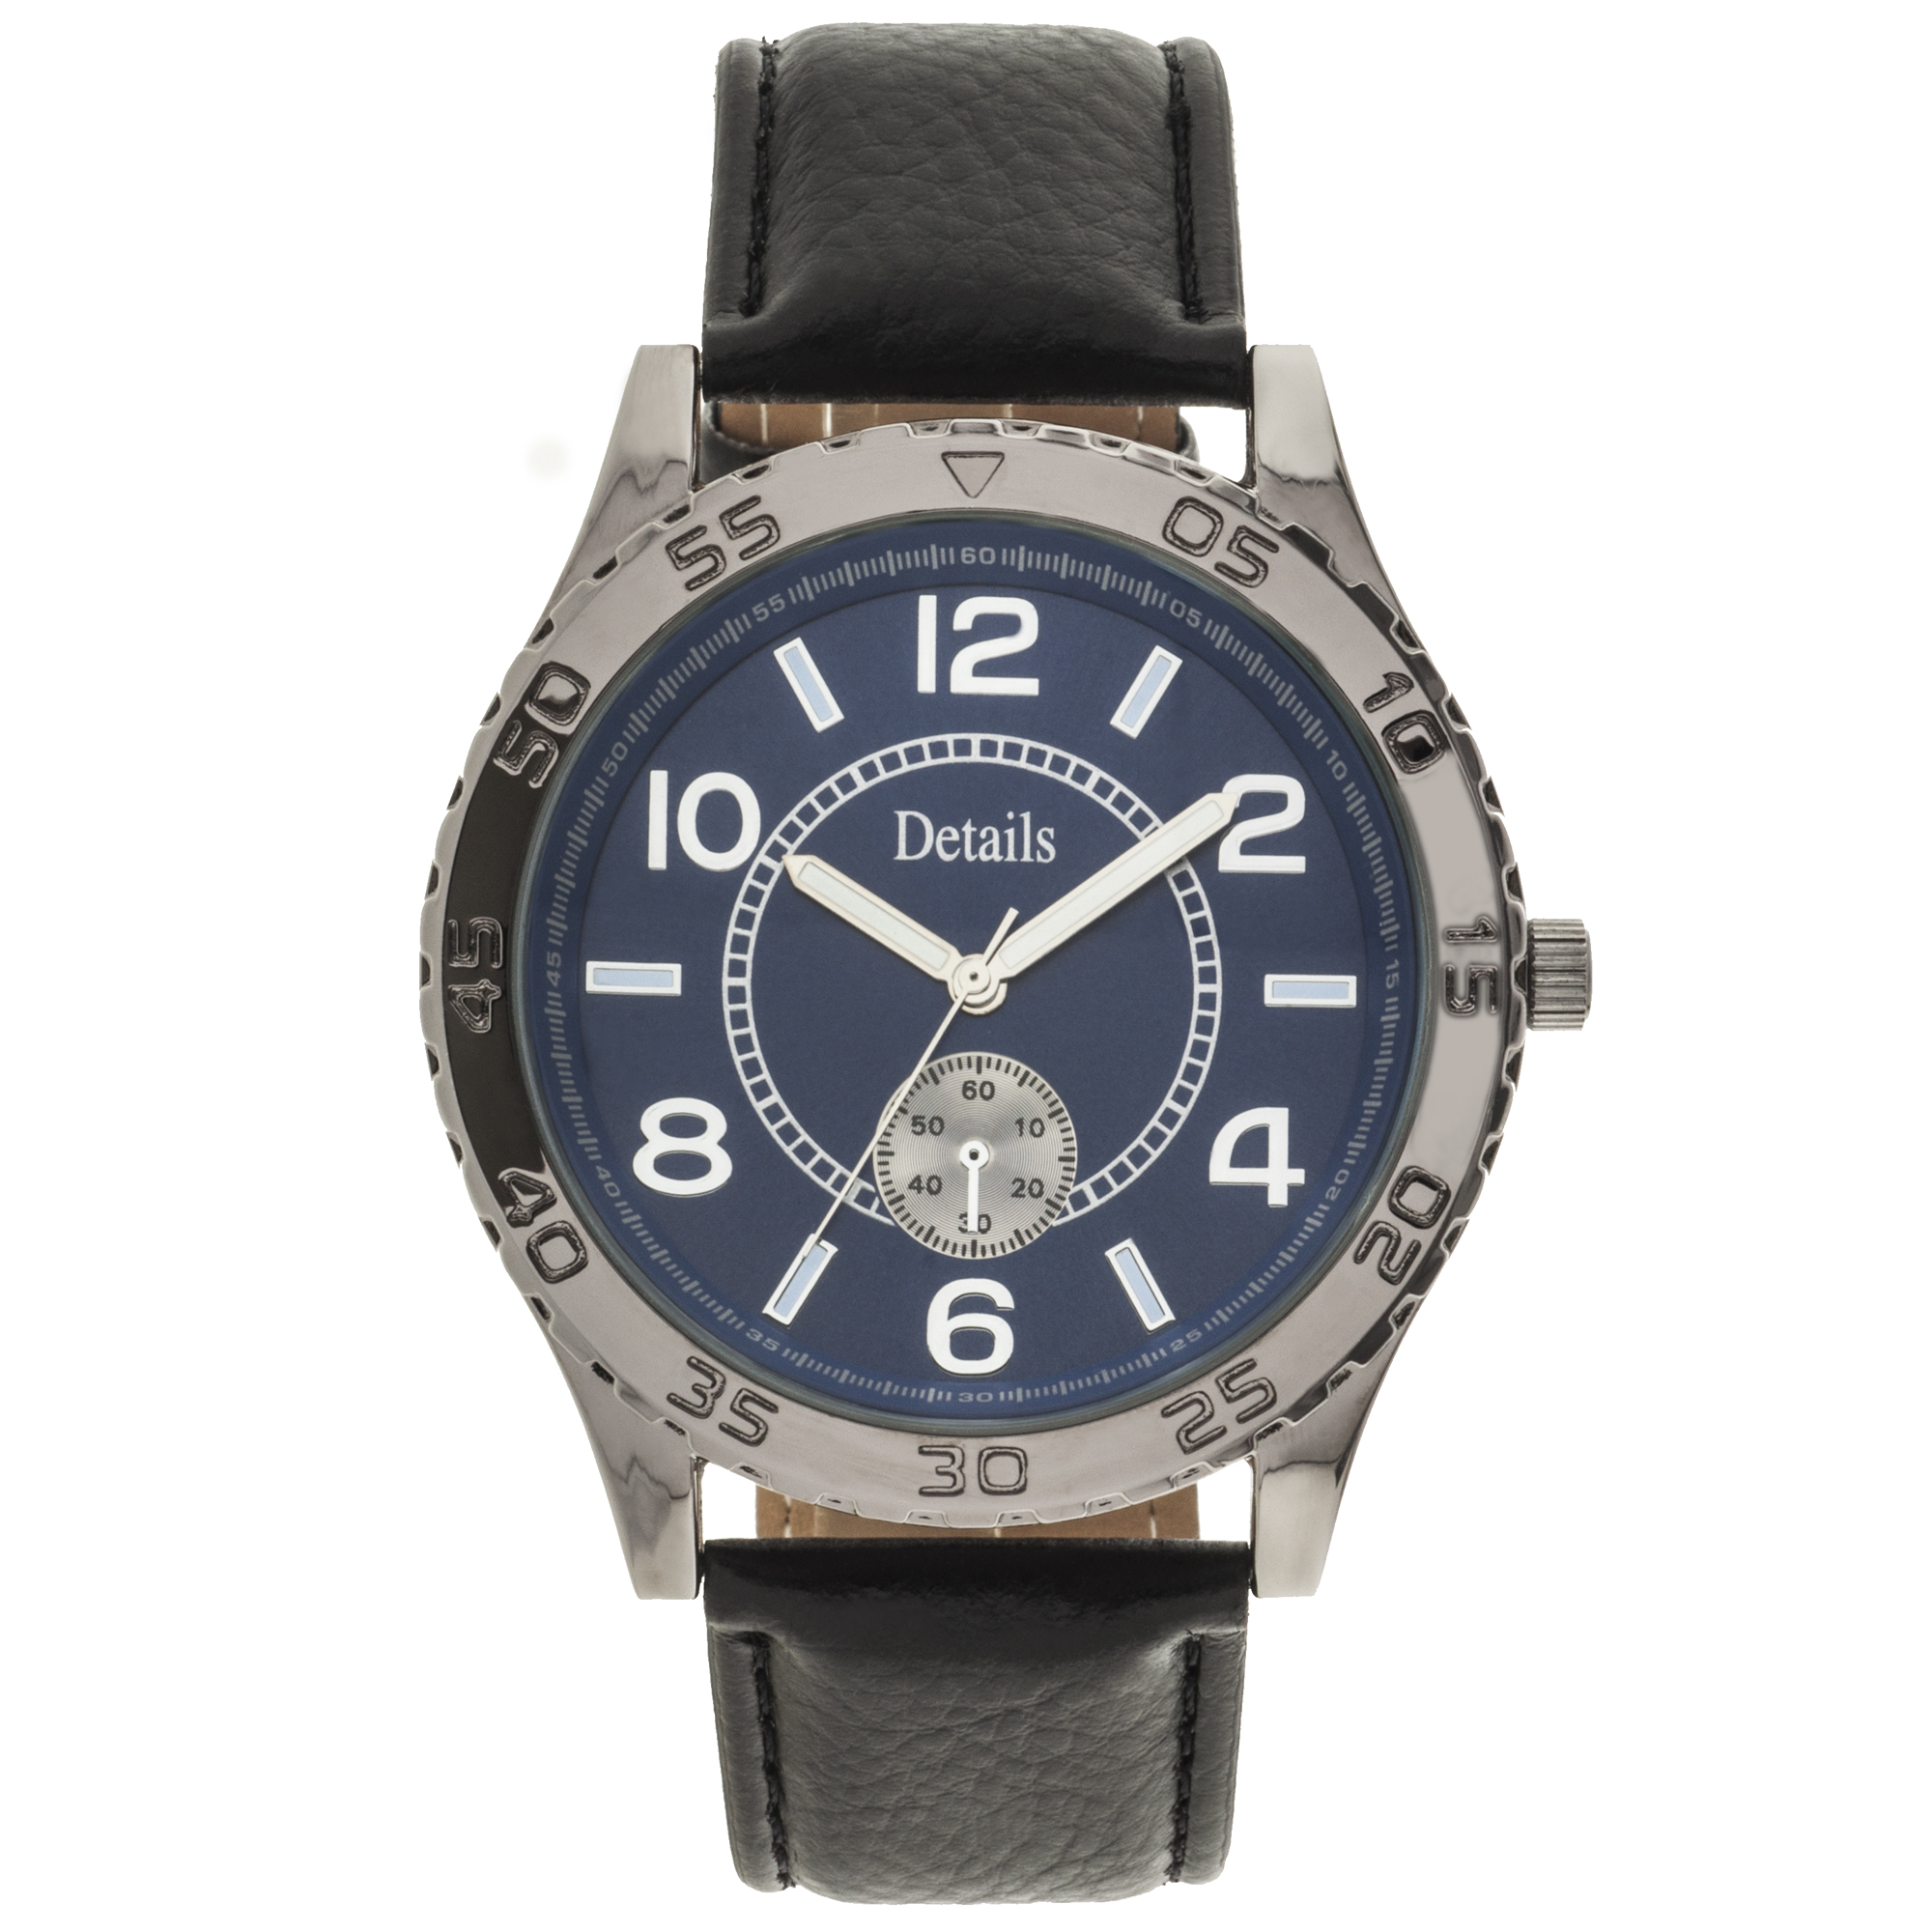 Men's Fashion Carded Watch